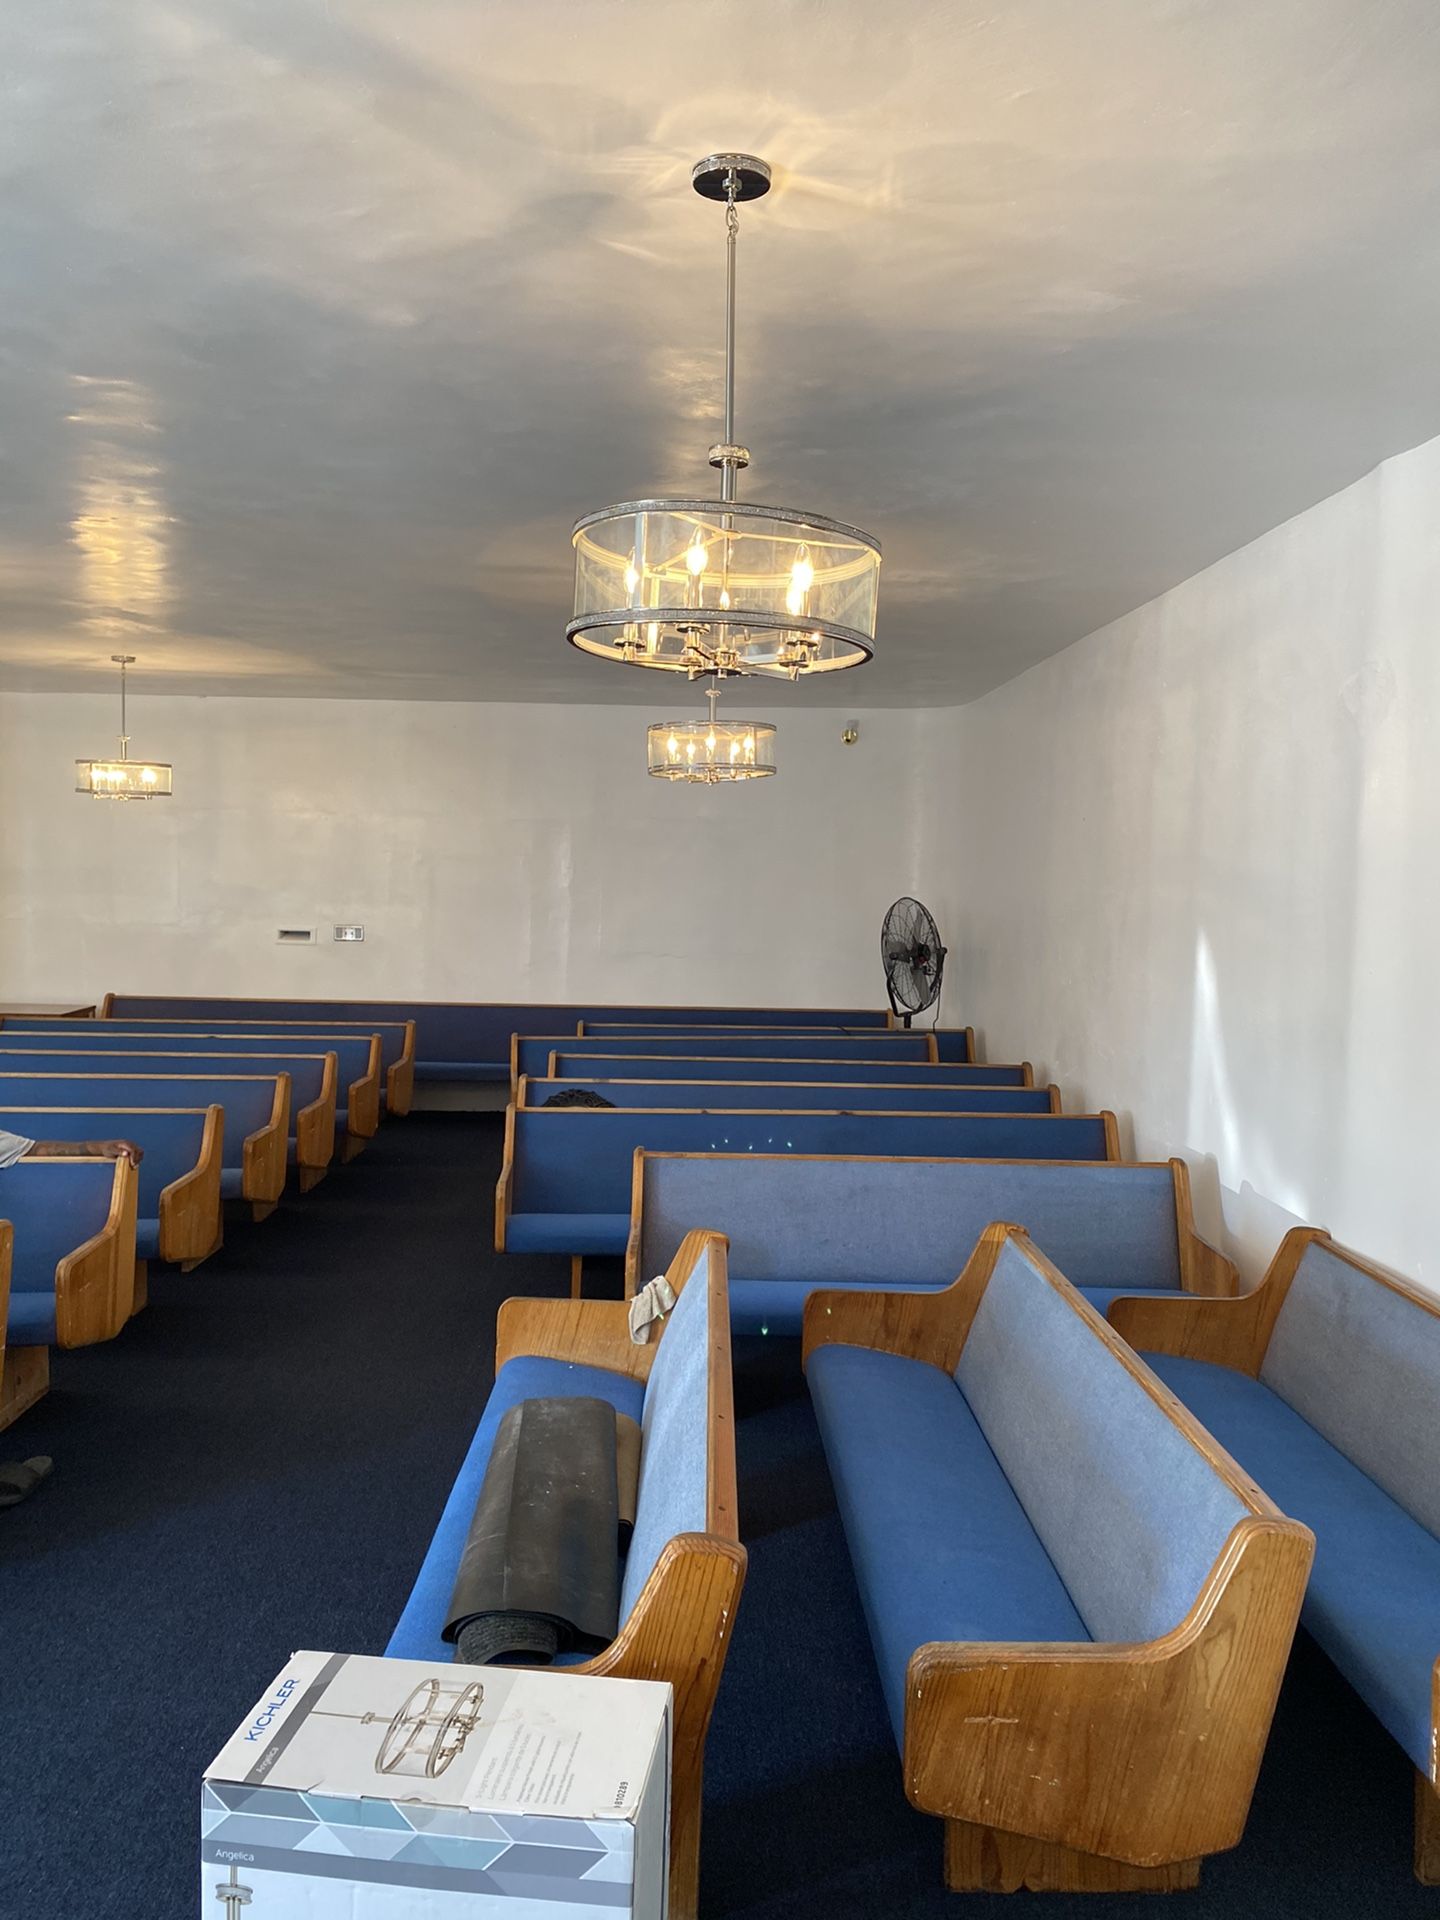 Church Pews as is For sale price is negotiable